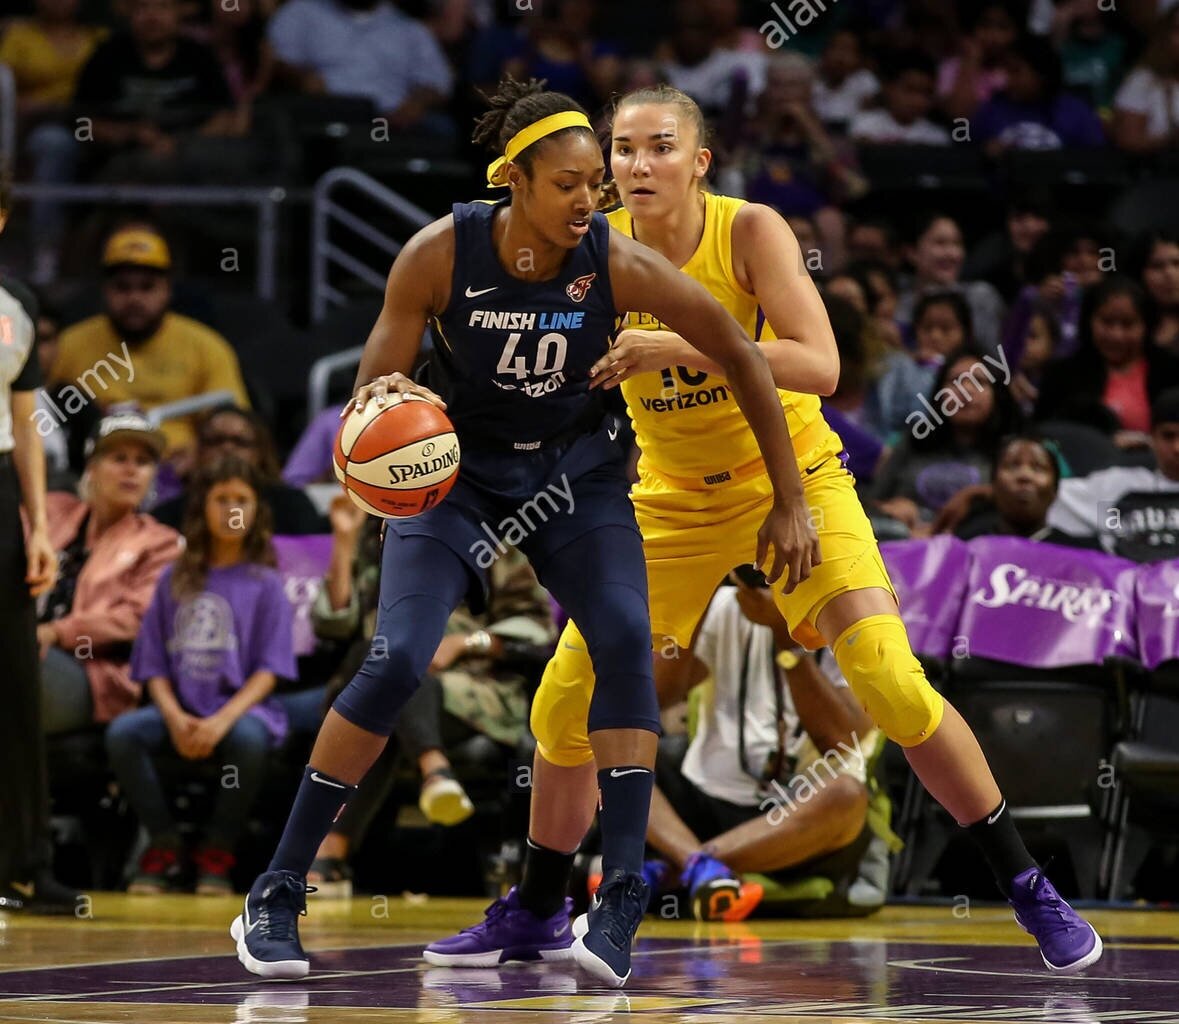 indiana-fever-center-kayla-alexander-40-guarded-by-los-angeles-sparks-center-maria-vadeeva-10-during-the-indiana-fever-vs-los-angeles-sparks-game-at-staples-center-in-los-angeles-ca-on-july-1-2018-photo-by-jevone-moore-PA743Y.jpg